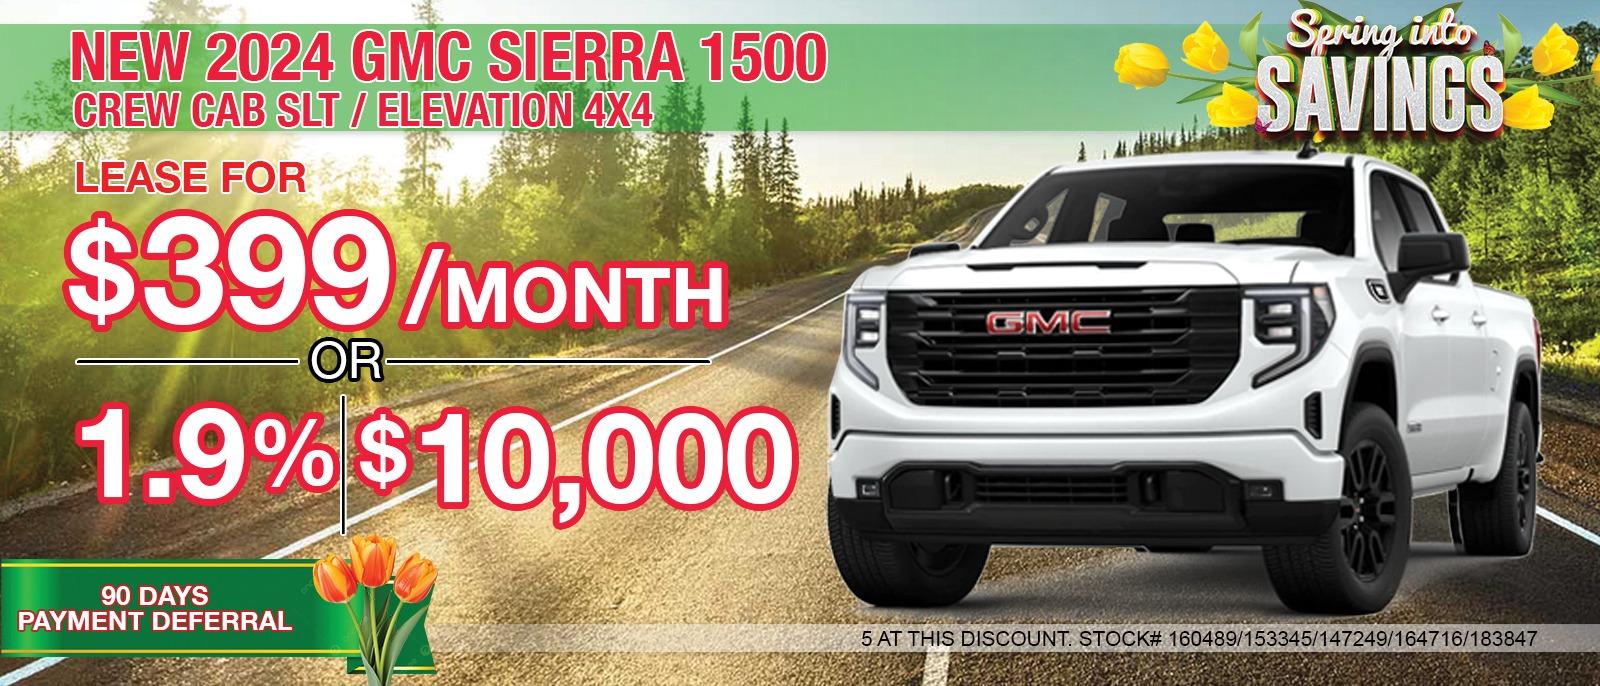 2024 GMC Sierra 1500 Crew Cab
DENALI ULTIMATE / DENALI / SLT / ELEVATION / 4x4. Your Net Savings After All Offers save up to $10,000.